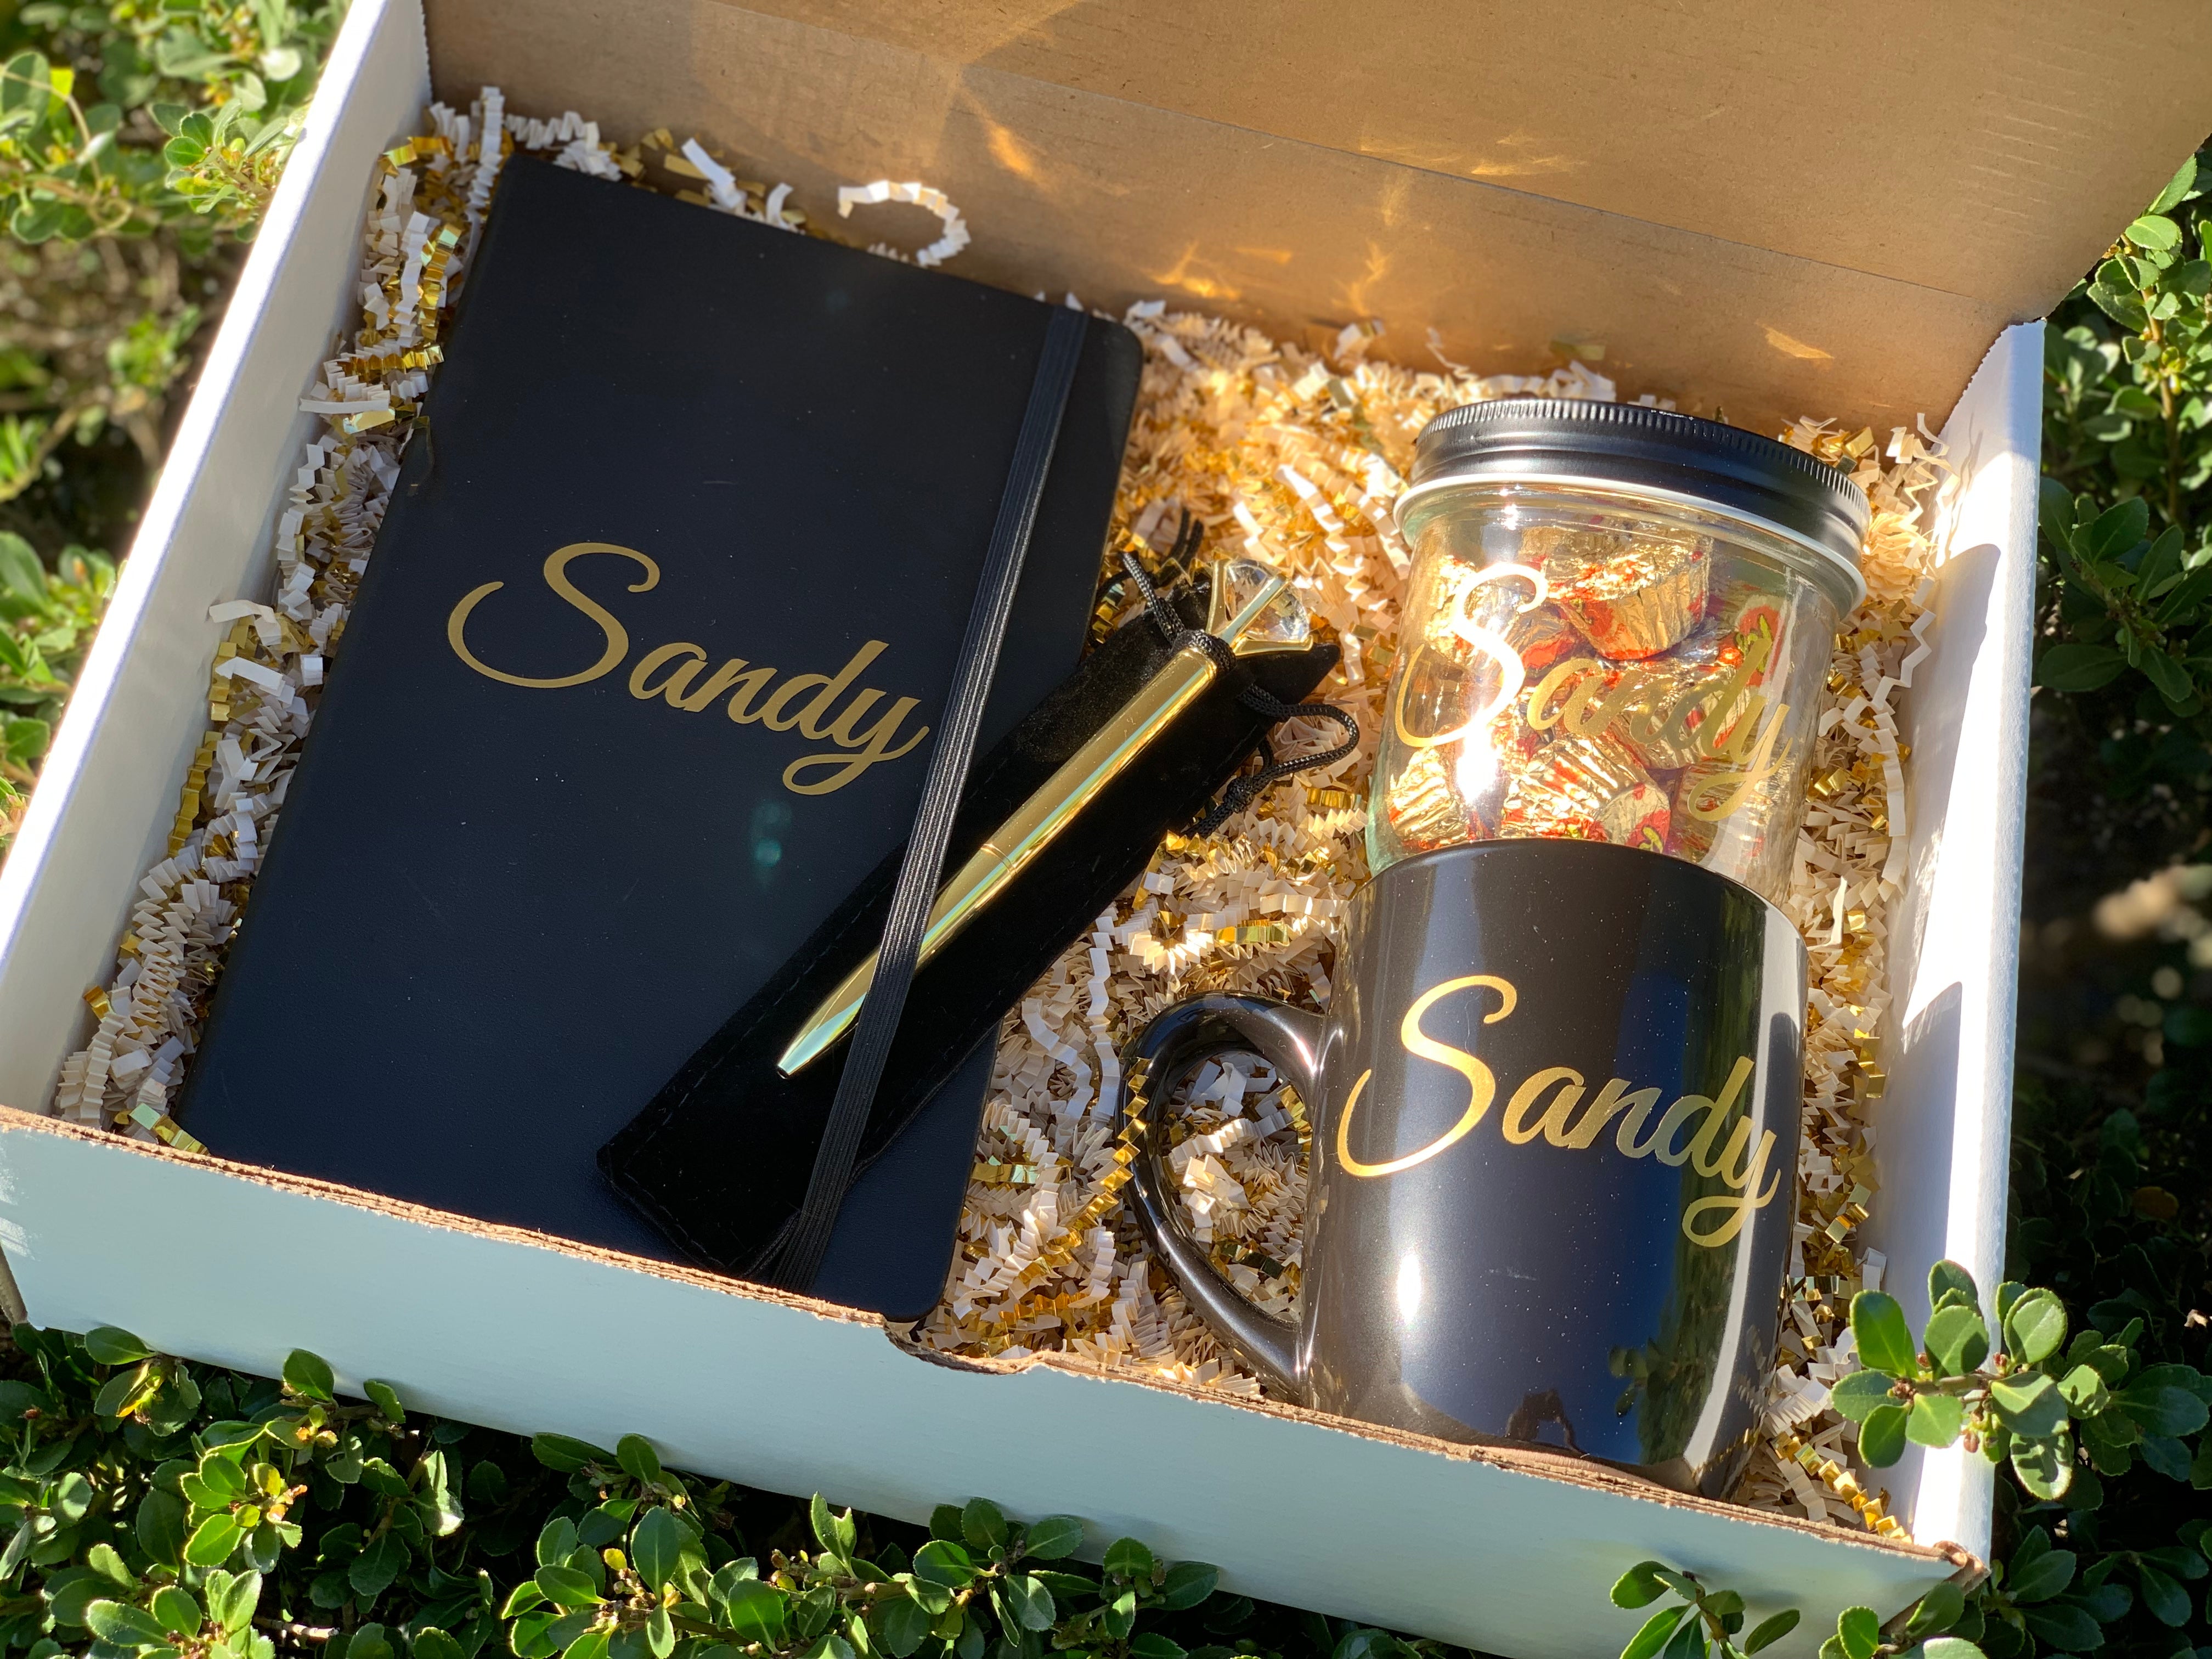 Personalized Gifting